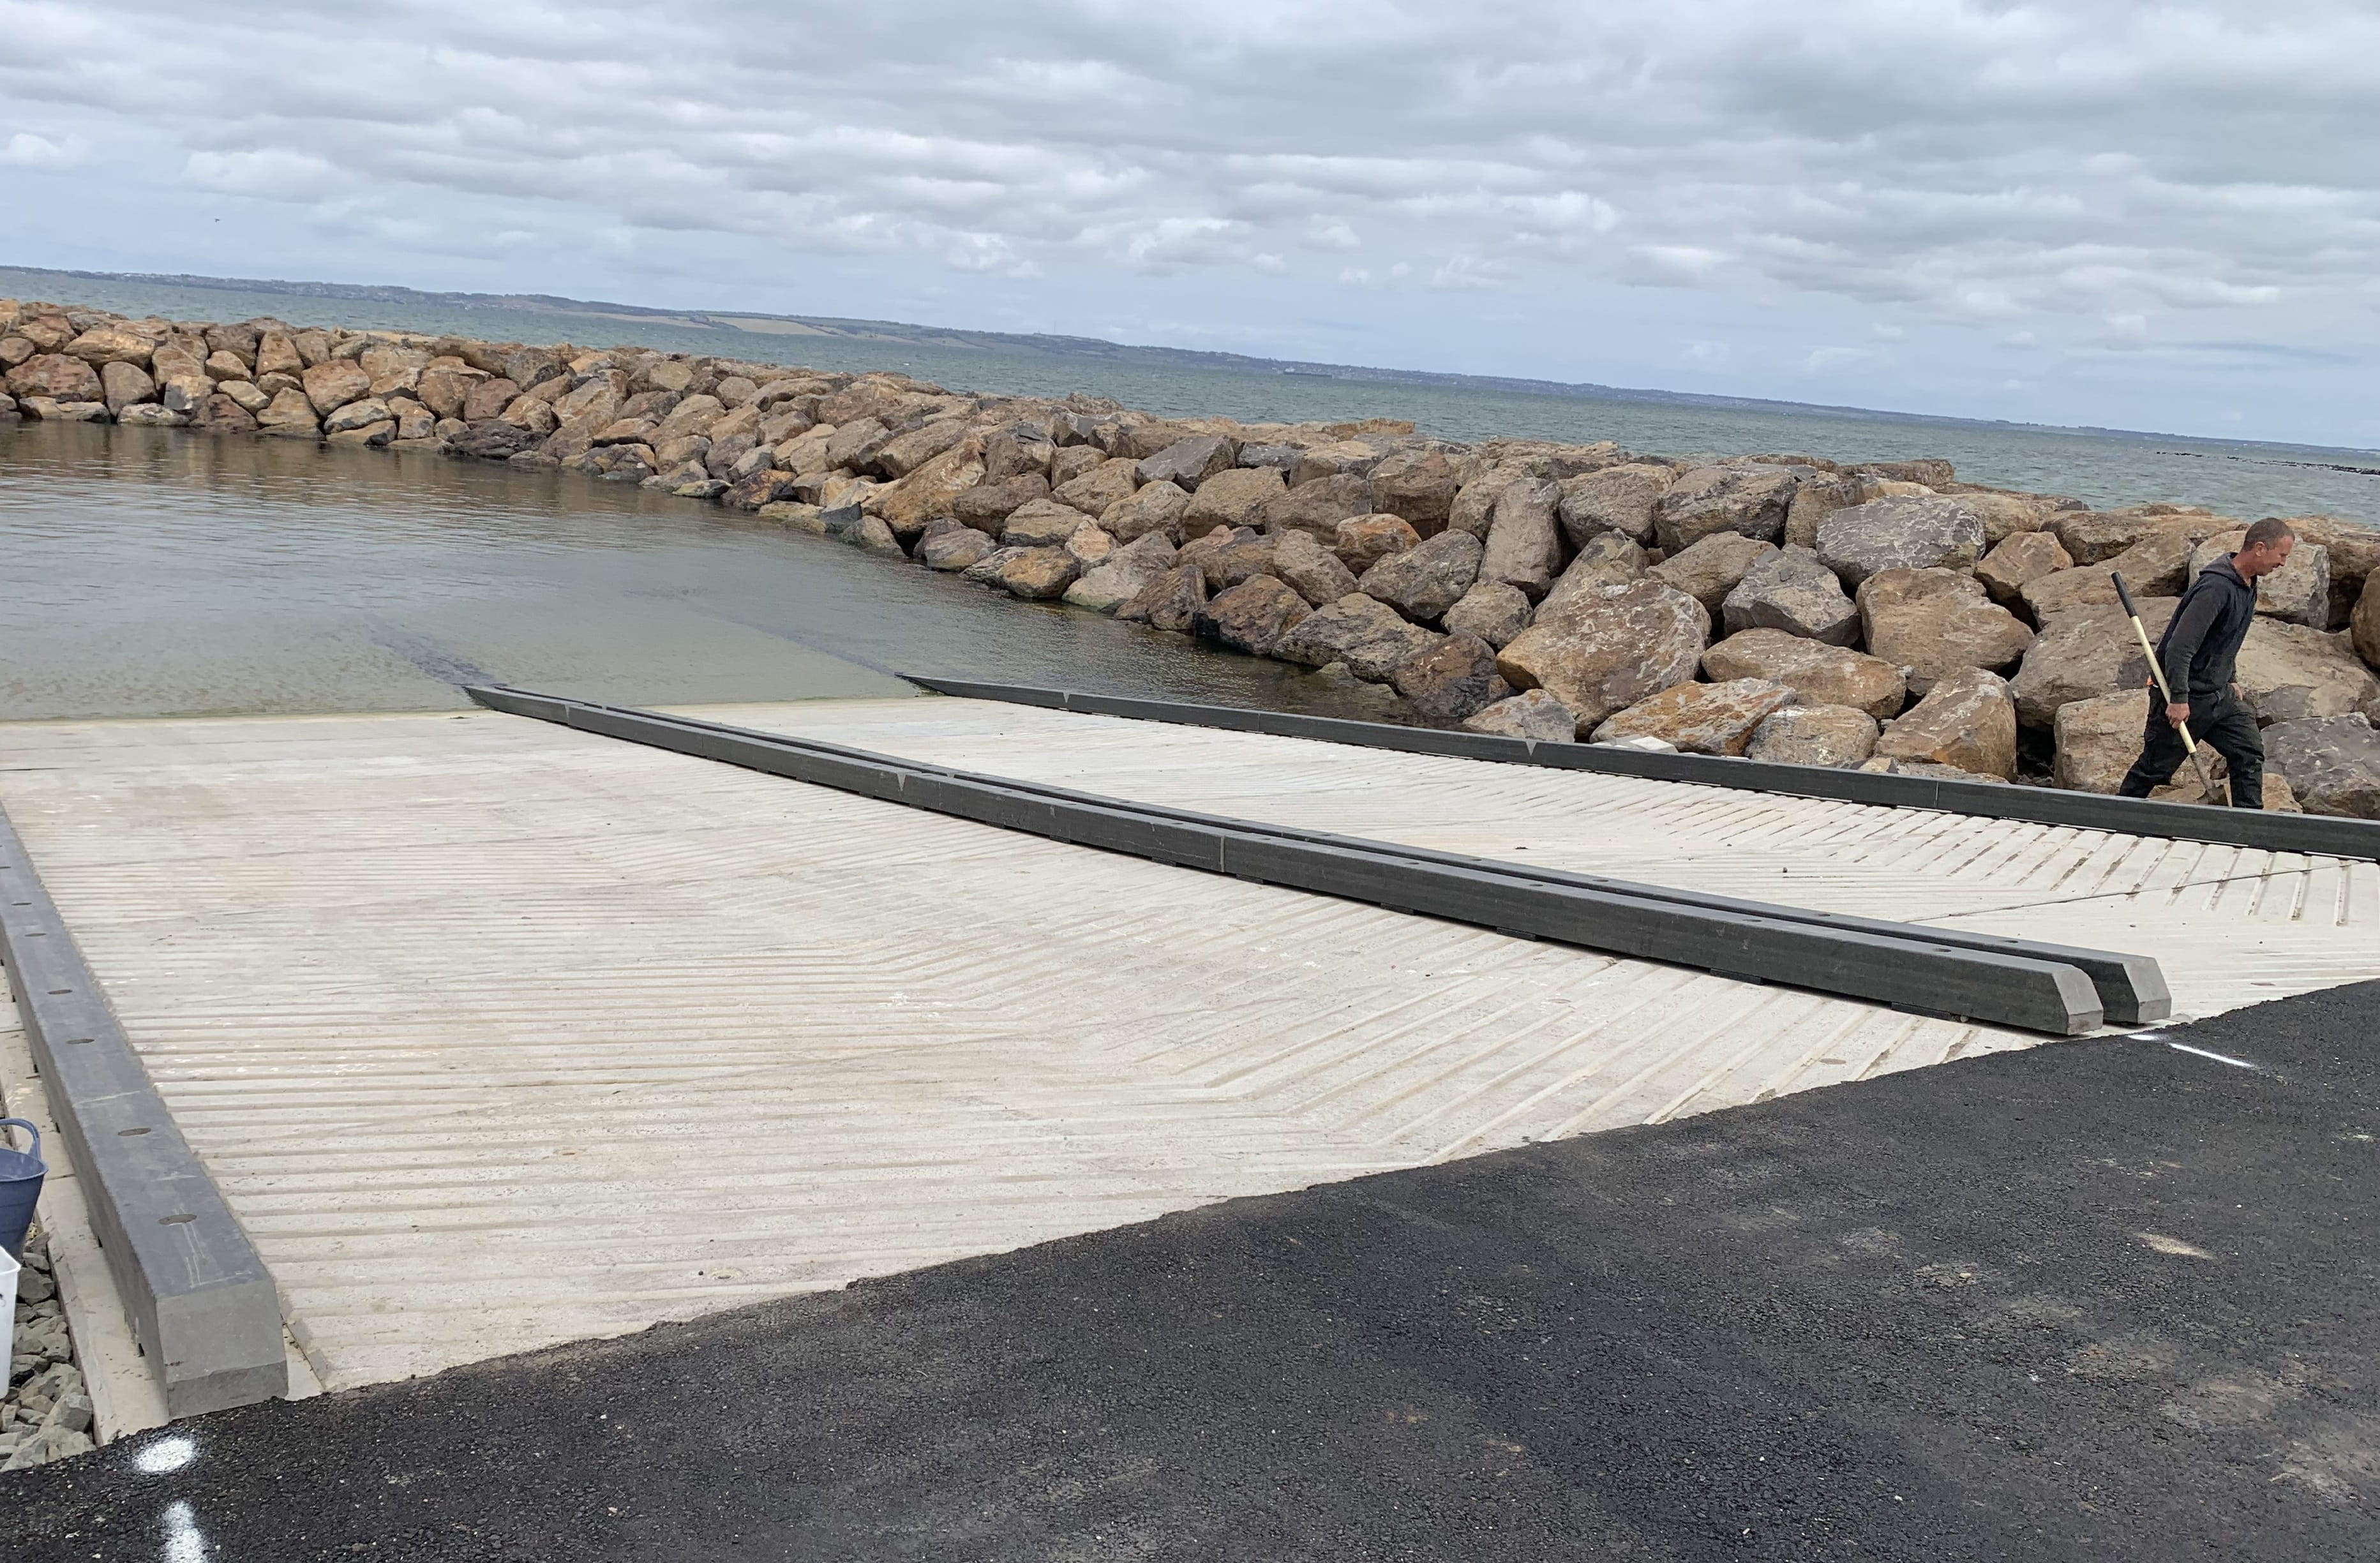 Concrete boat ramp with breakwater in background